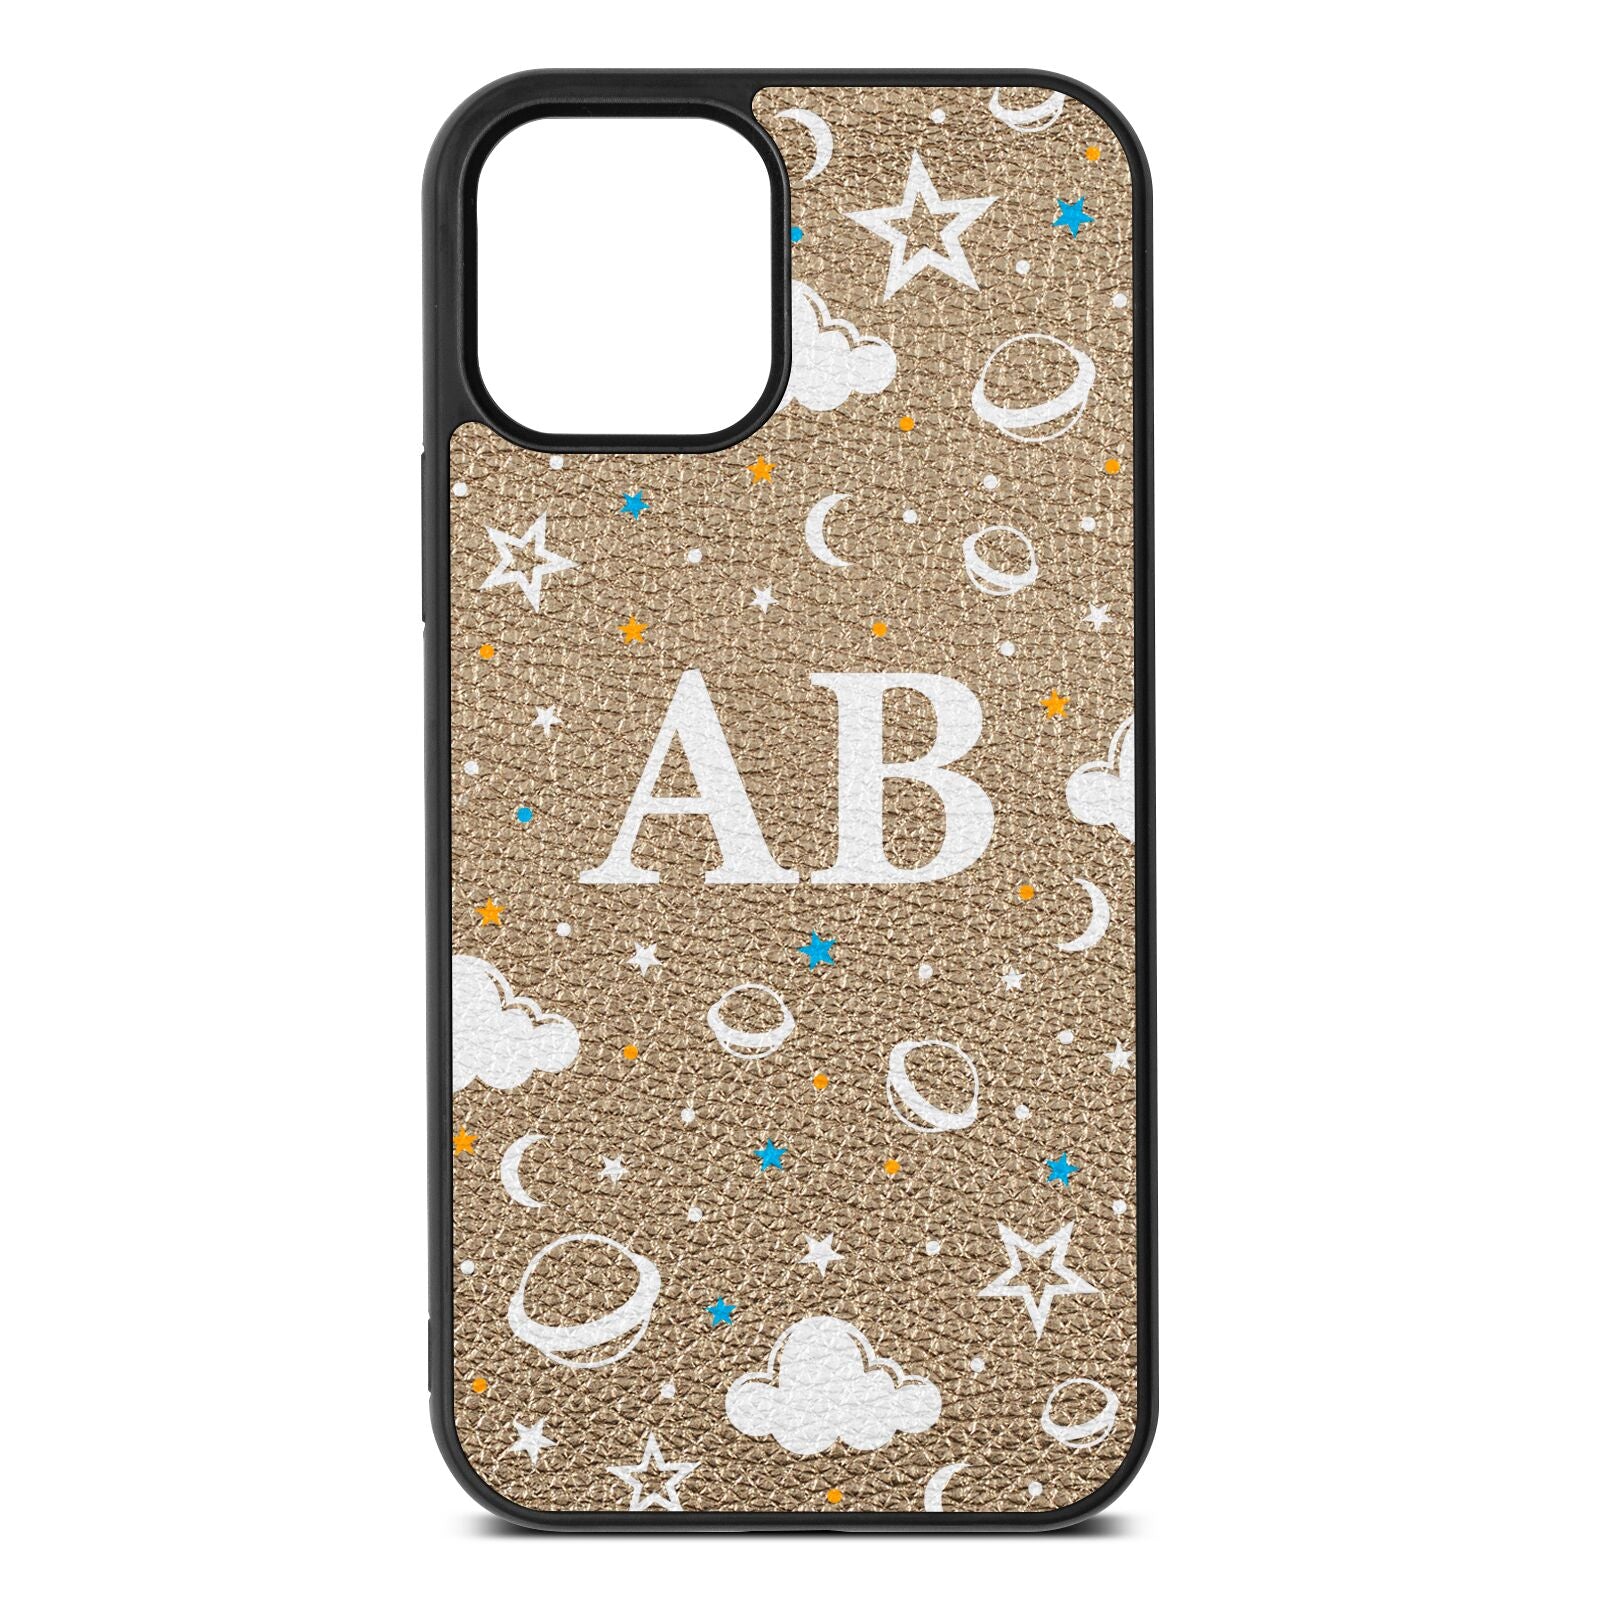 Astronomical Initials Gold Pebble Leather iPhone 12 Case